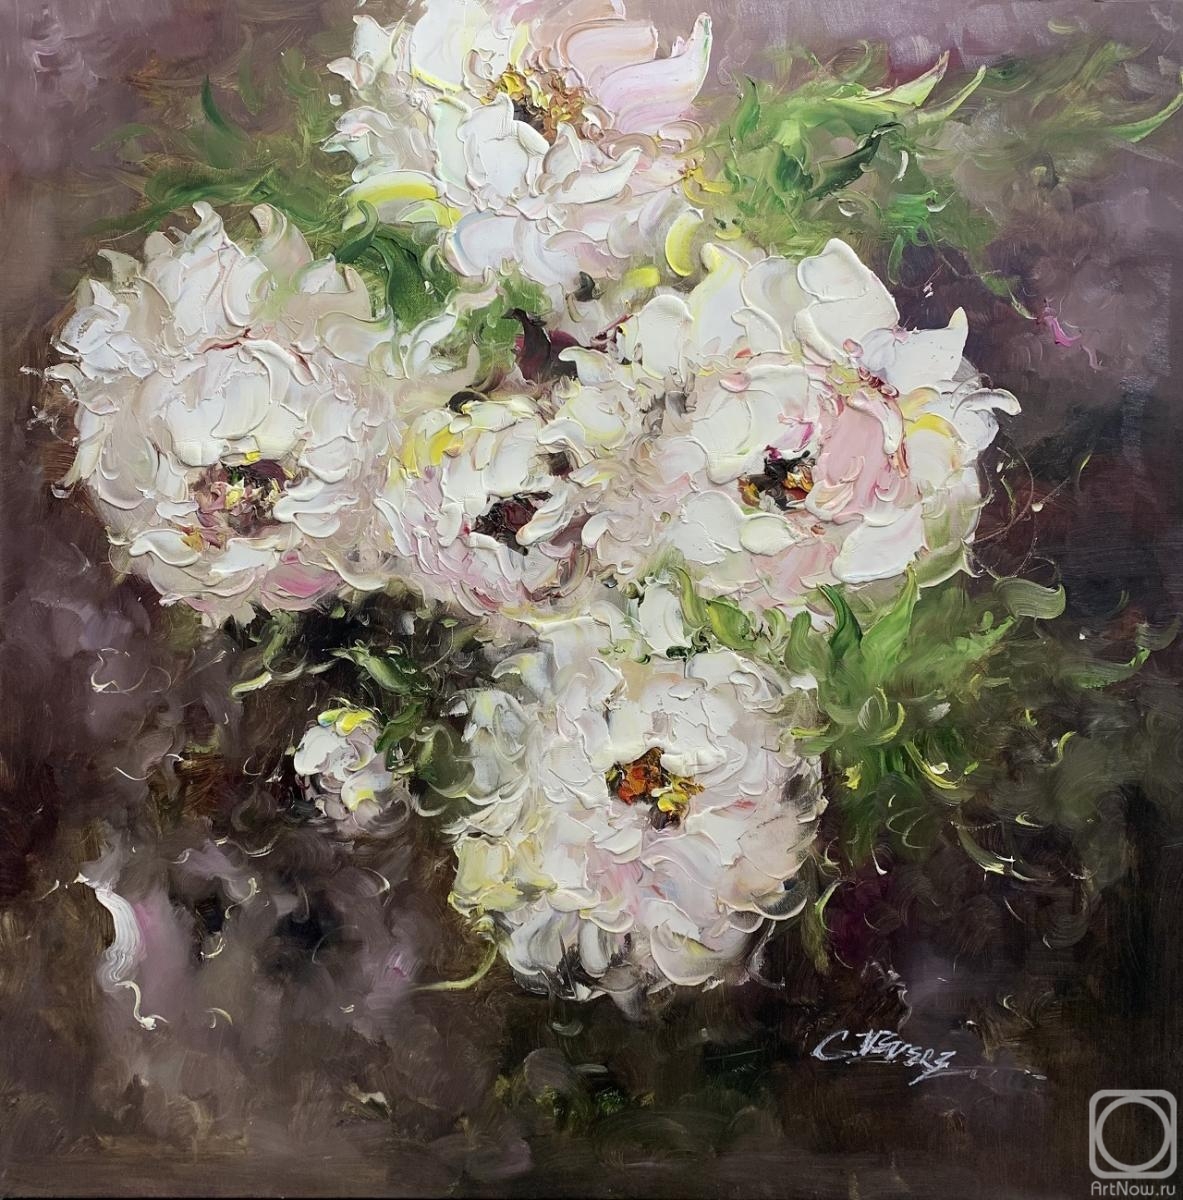 Vevers Christina. Bouquet of white peonies. Expression